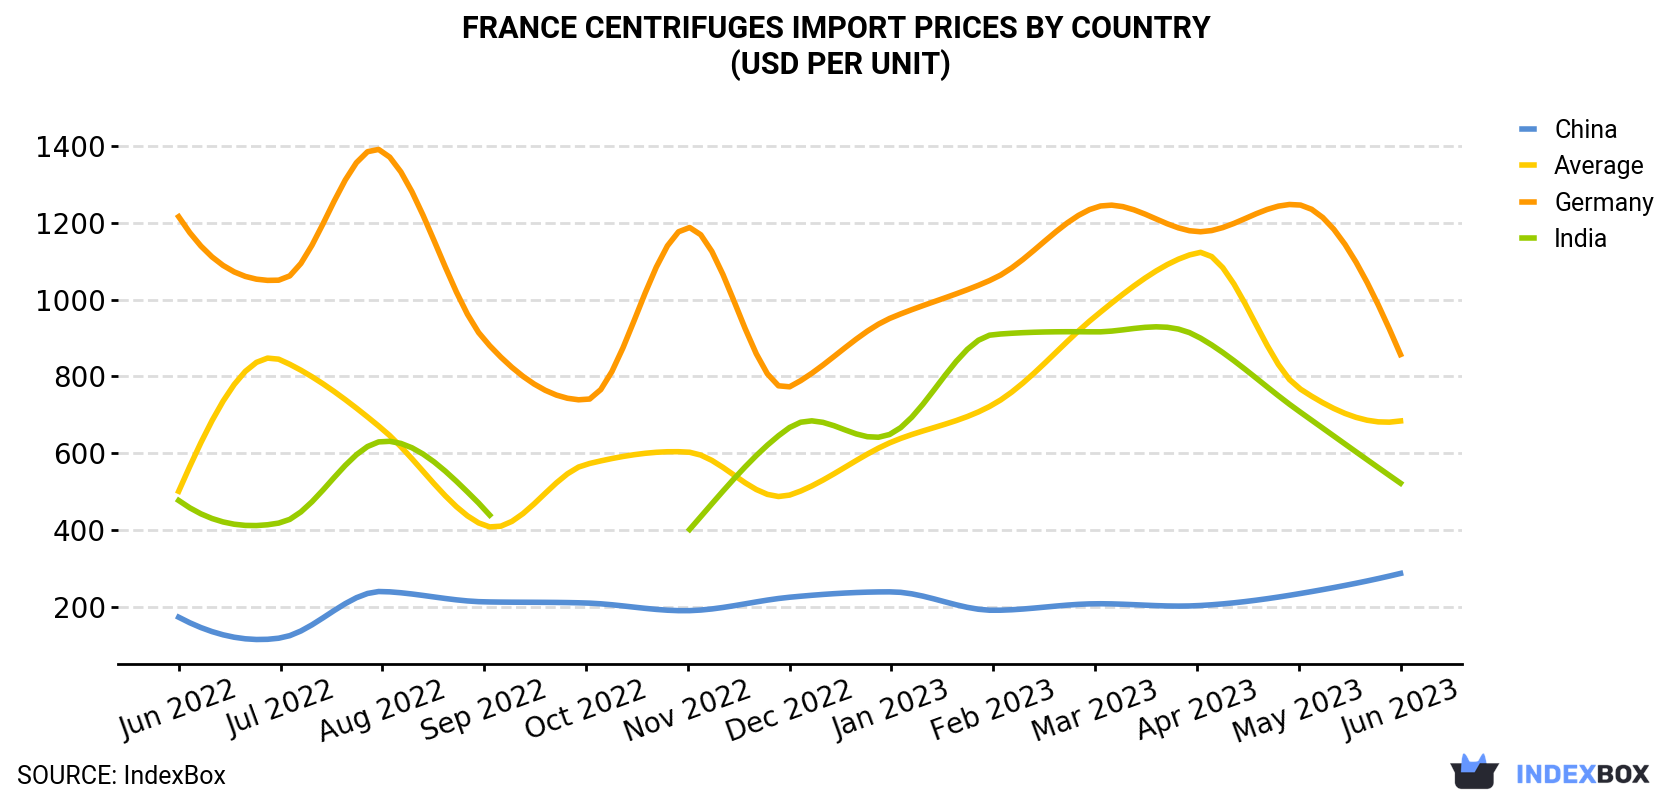 France Centrifuges Import Prices By Country (USD Per Unit)